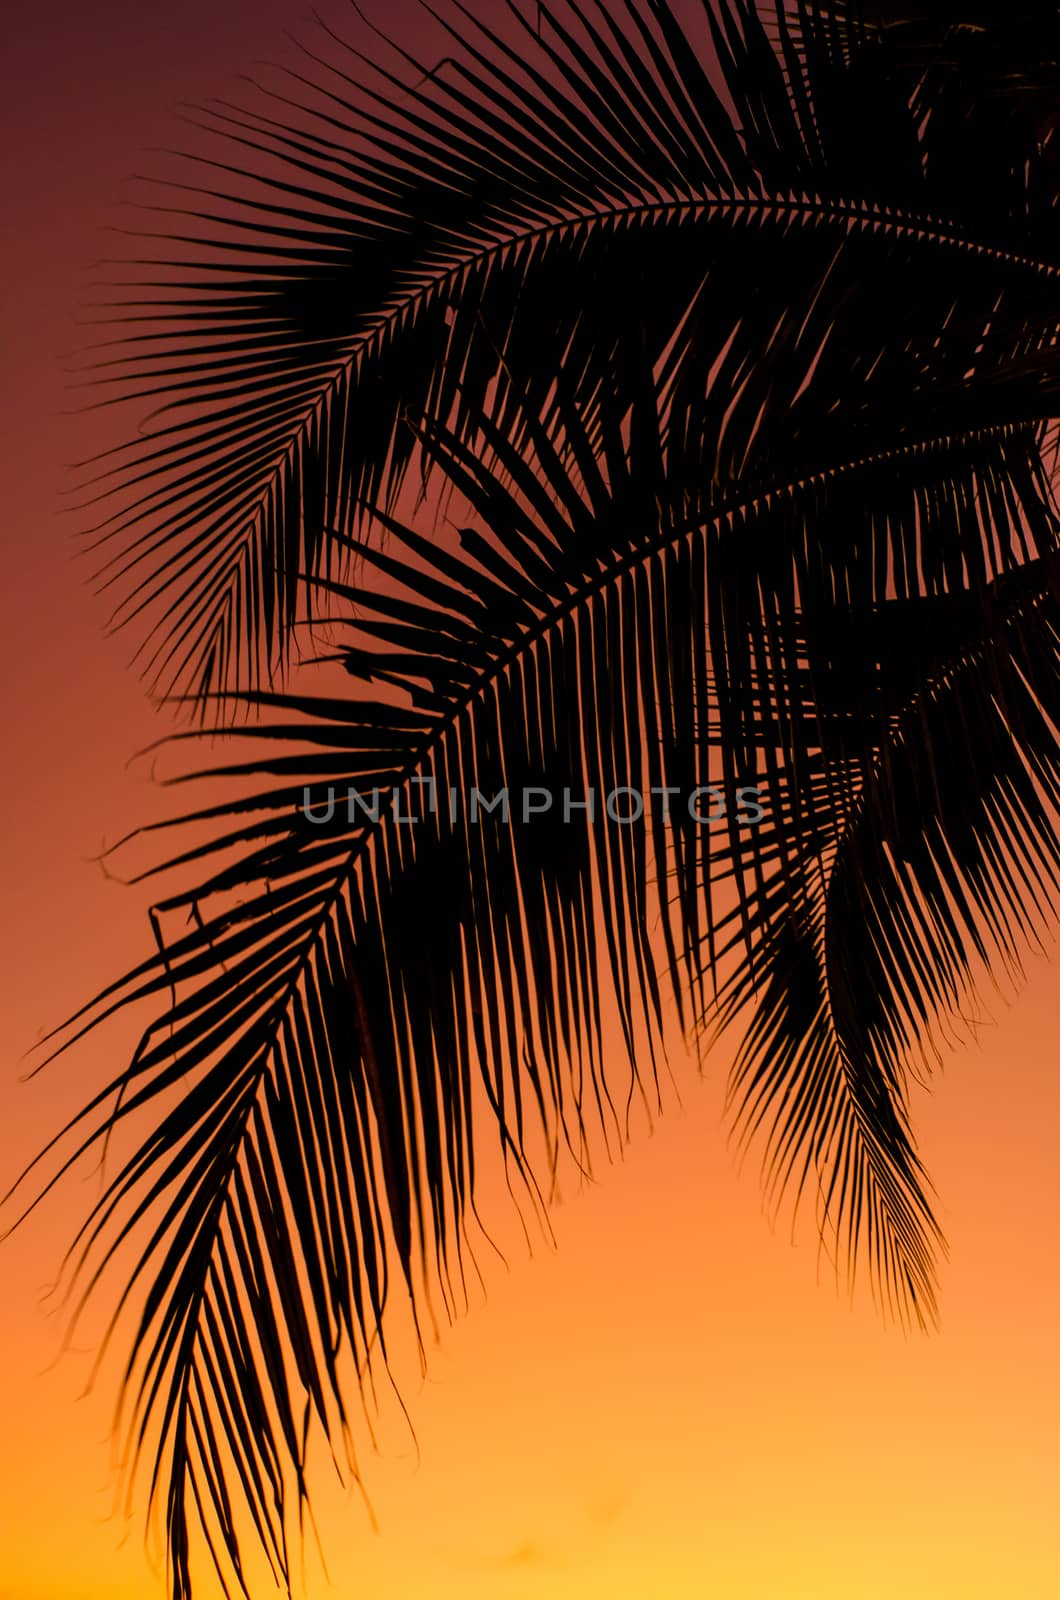 Coconut leaf silhouette with sunset sky background by pixbox77